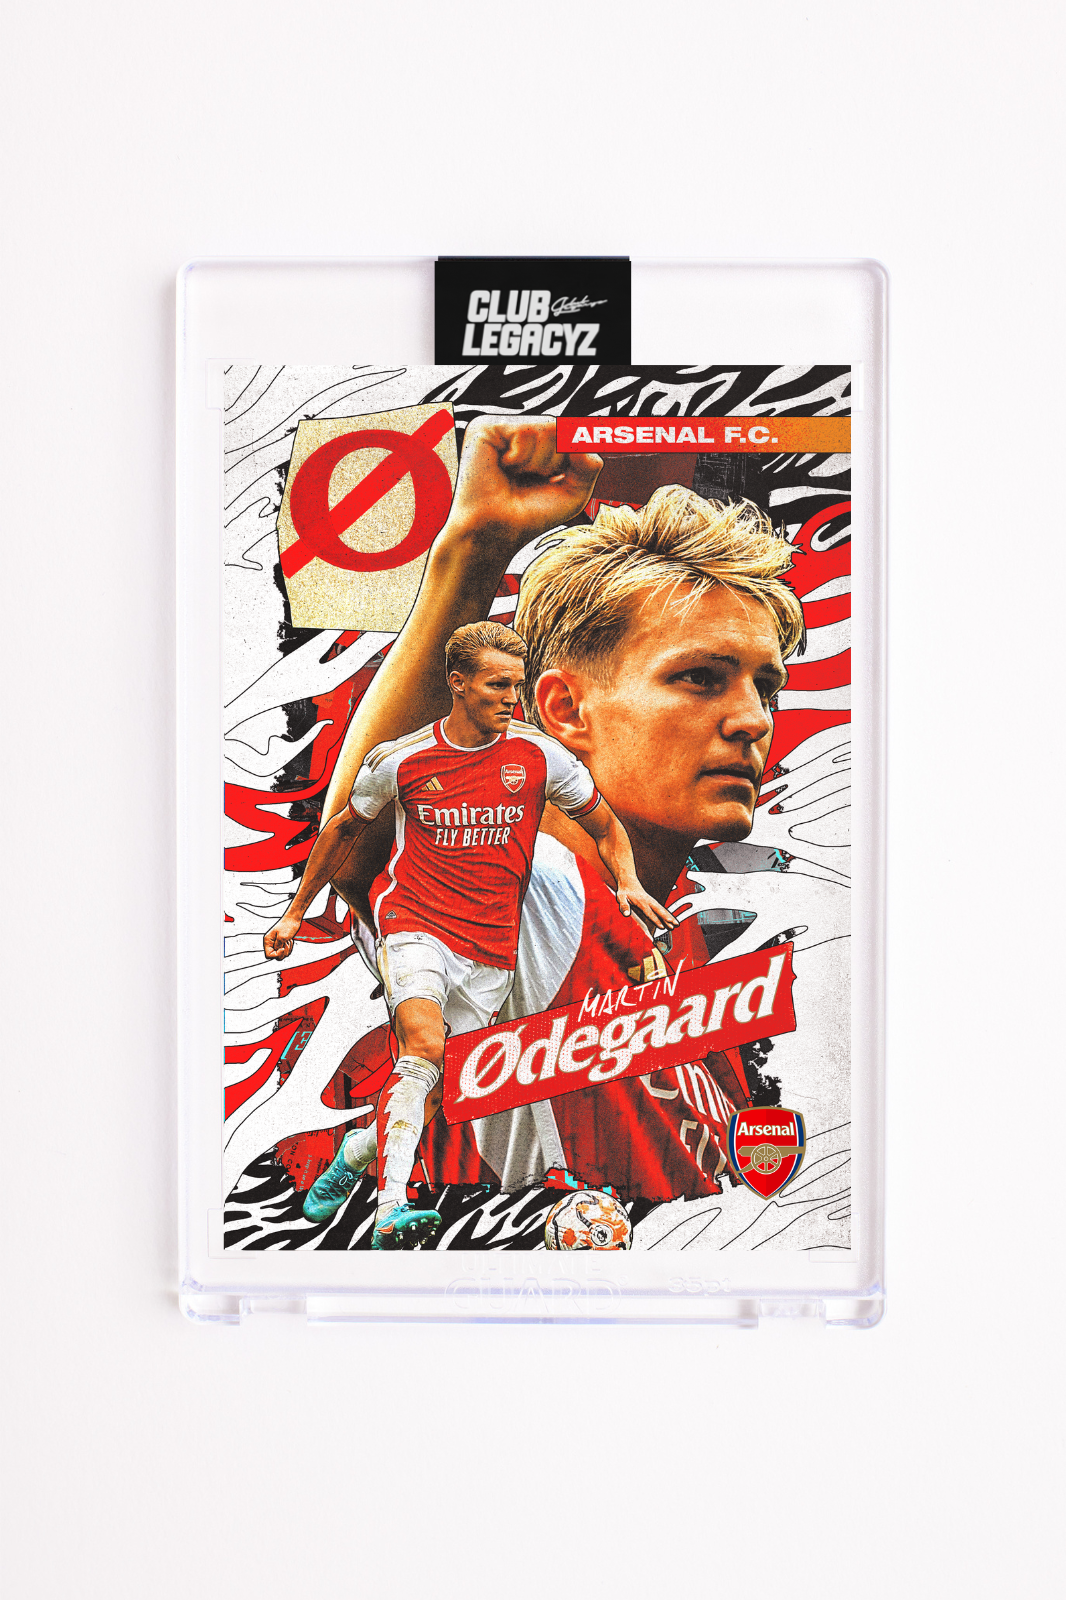 Arsenal FC - Martin Ødegaard Icon limited to 50